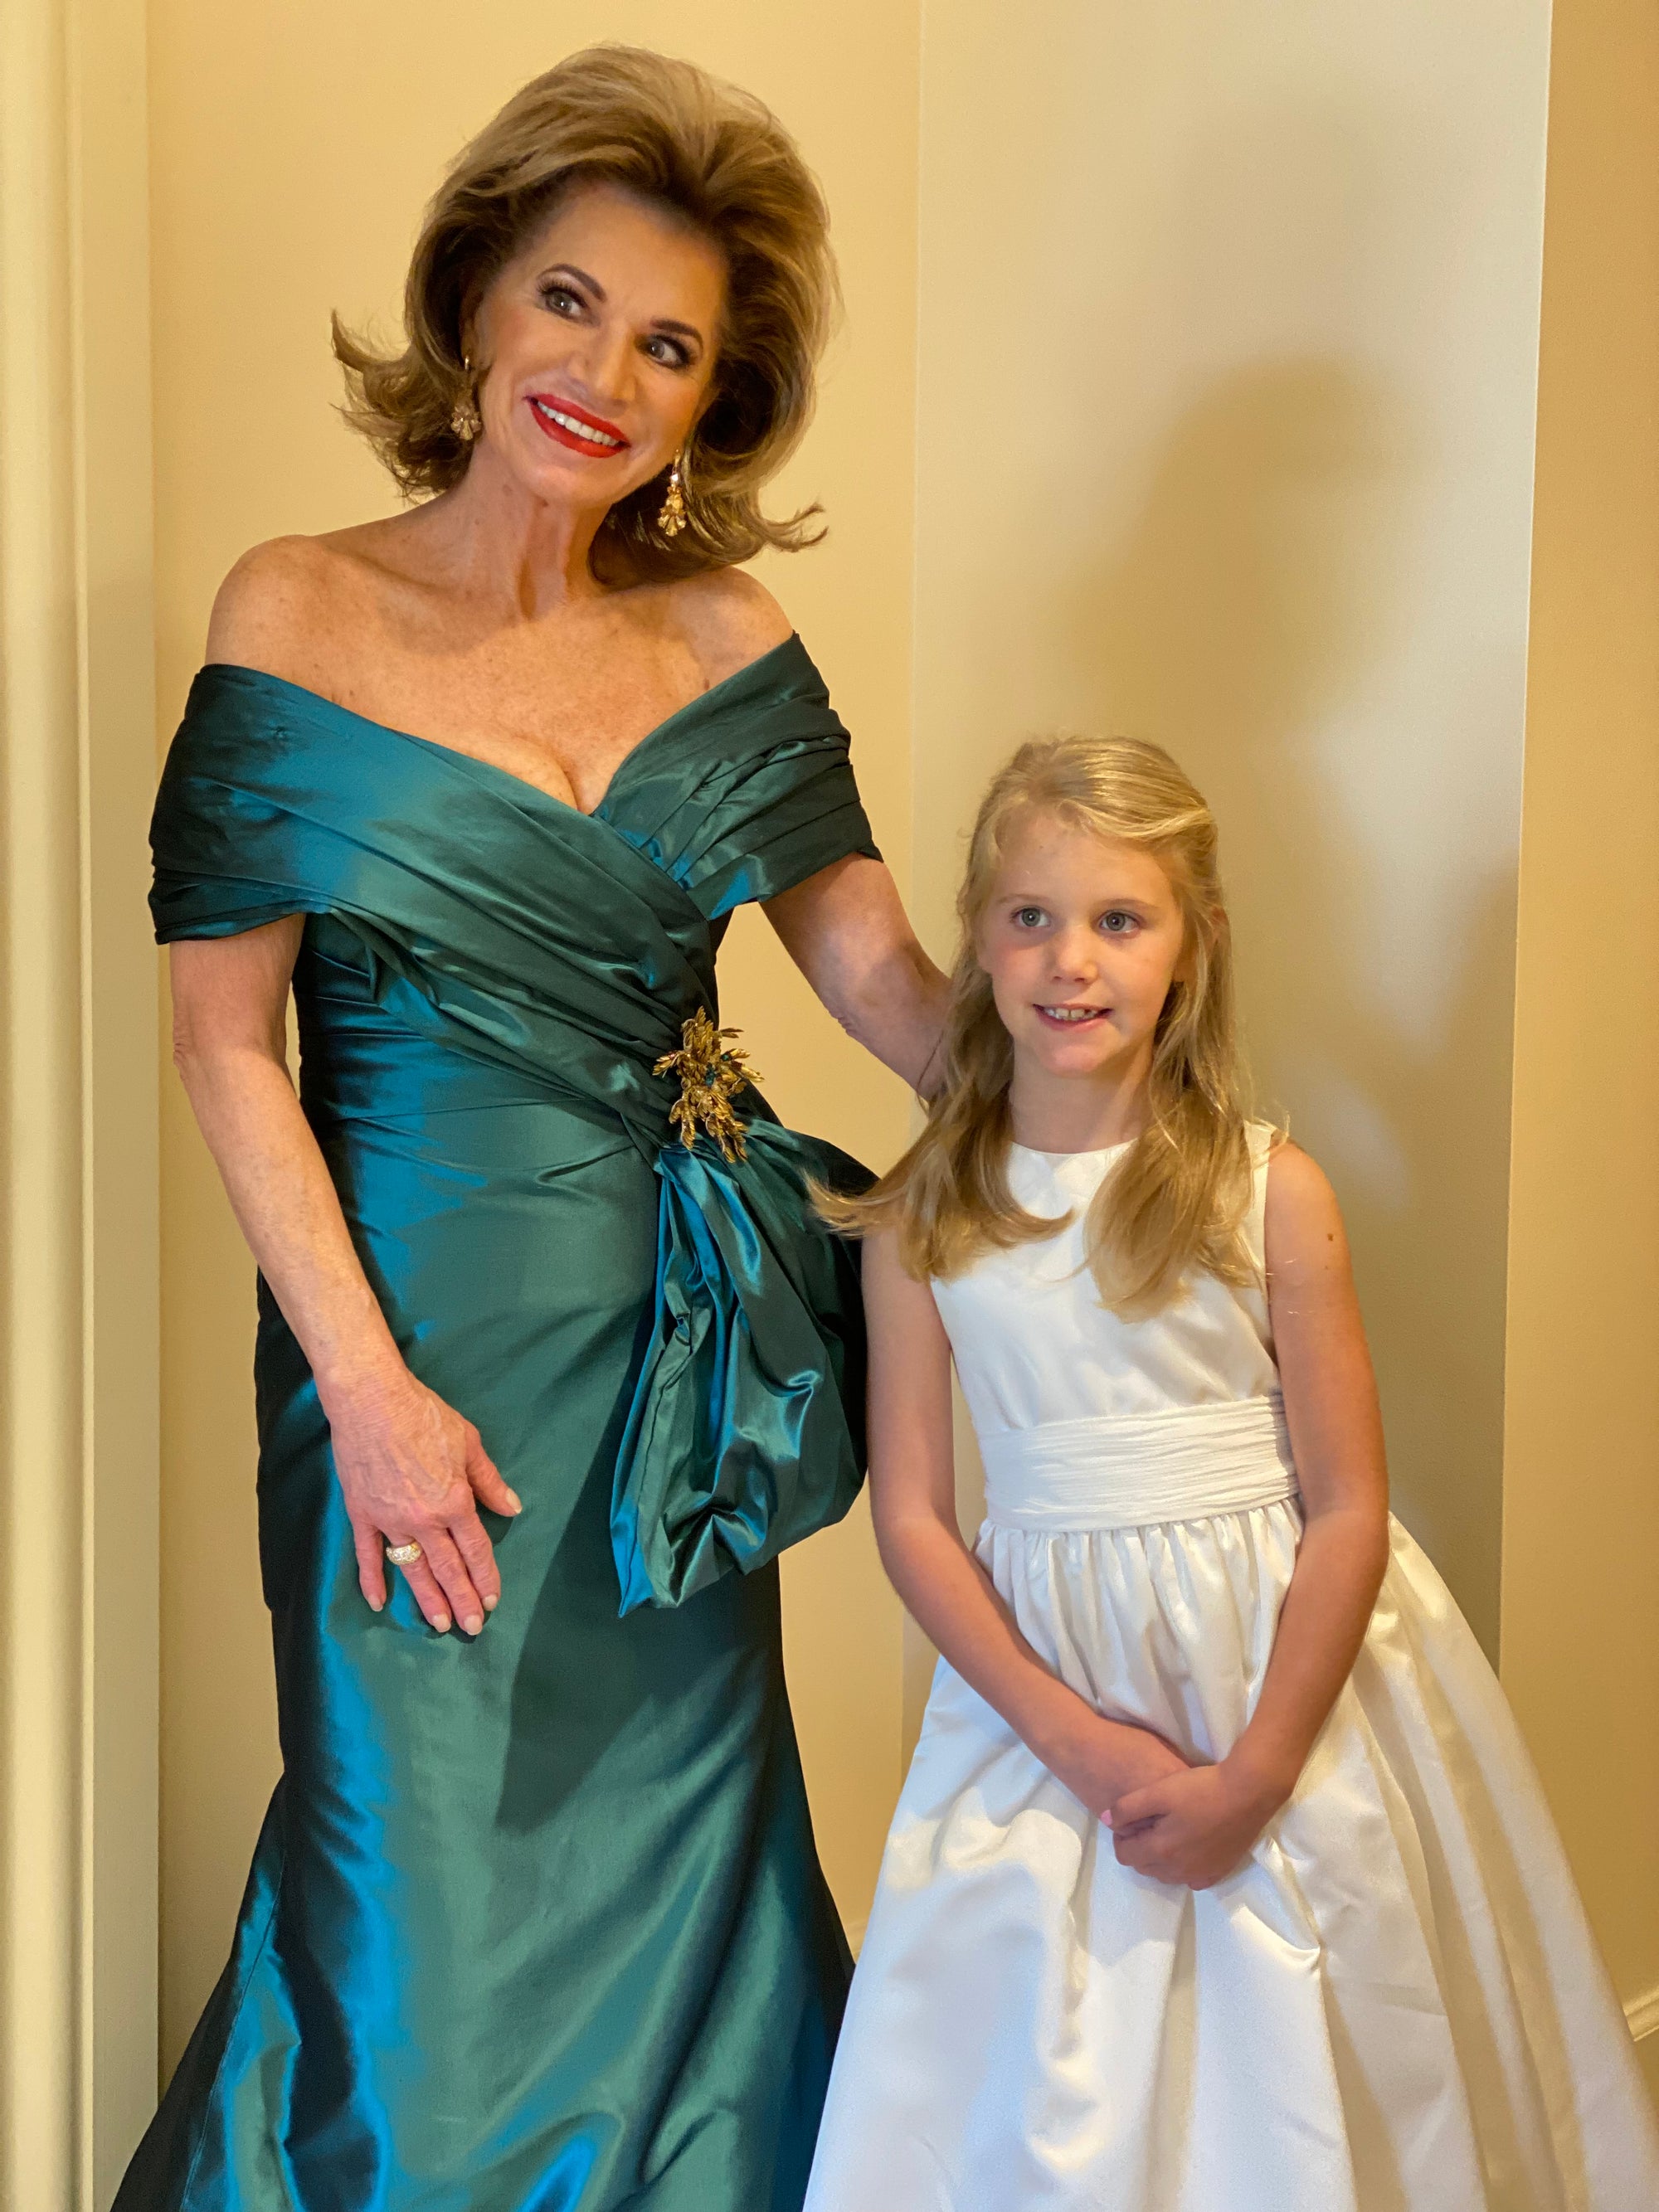 Debra Laws in her custom emerald green, off the shoulder, and wrap mother of the bride dress by David Peck smiling and posing next to a flower girl.